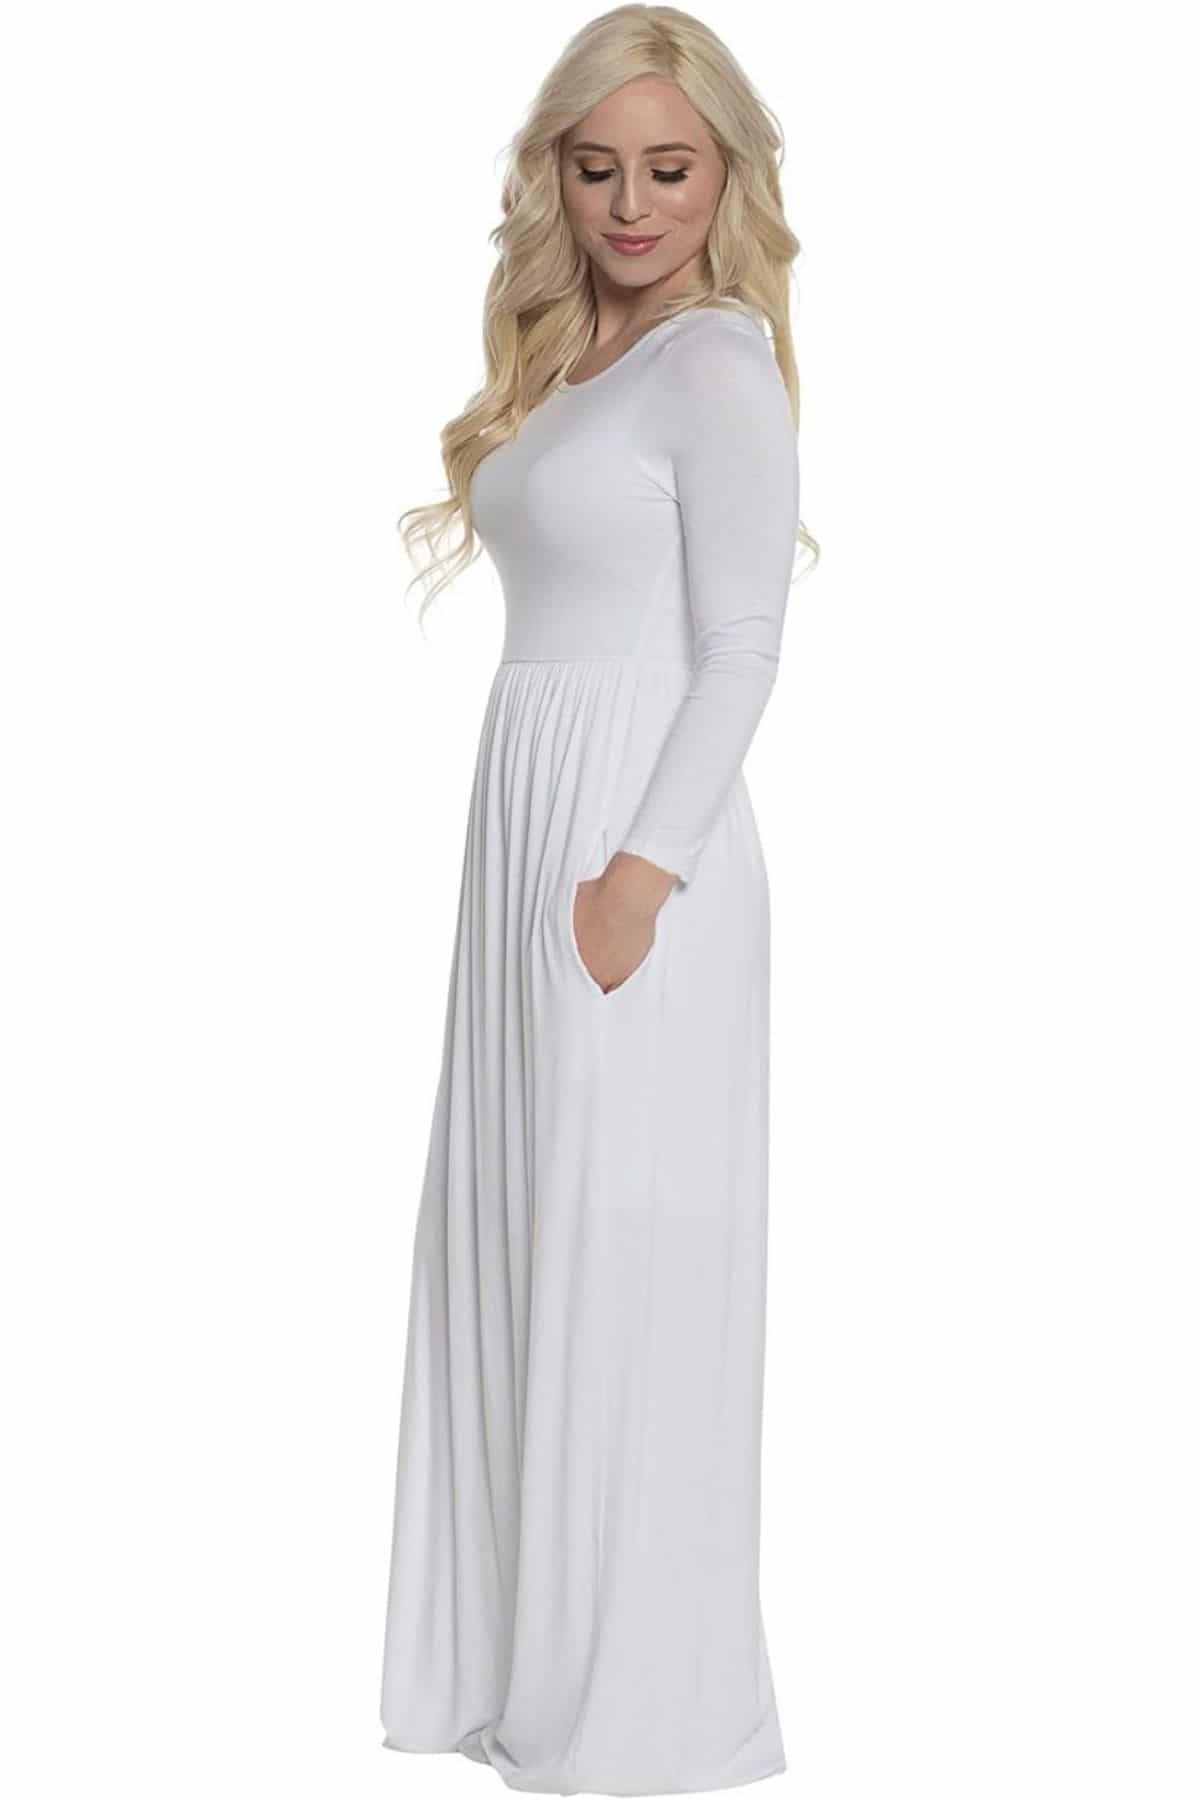 LDS temple dresses from Jen Clothing